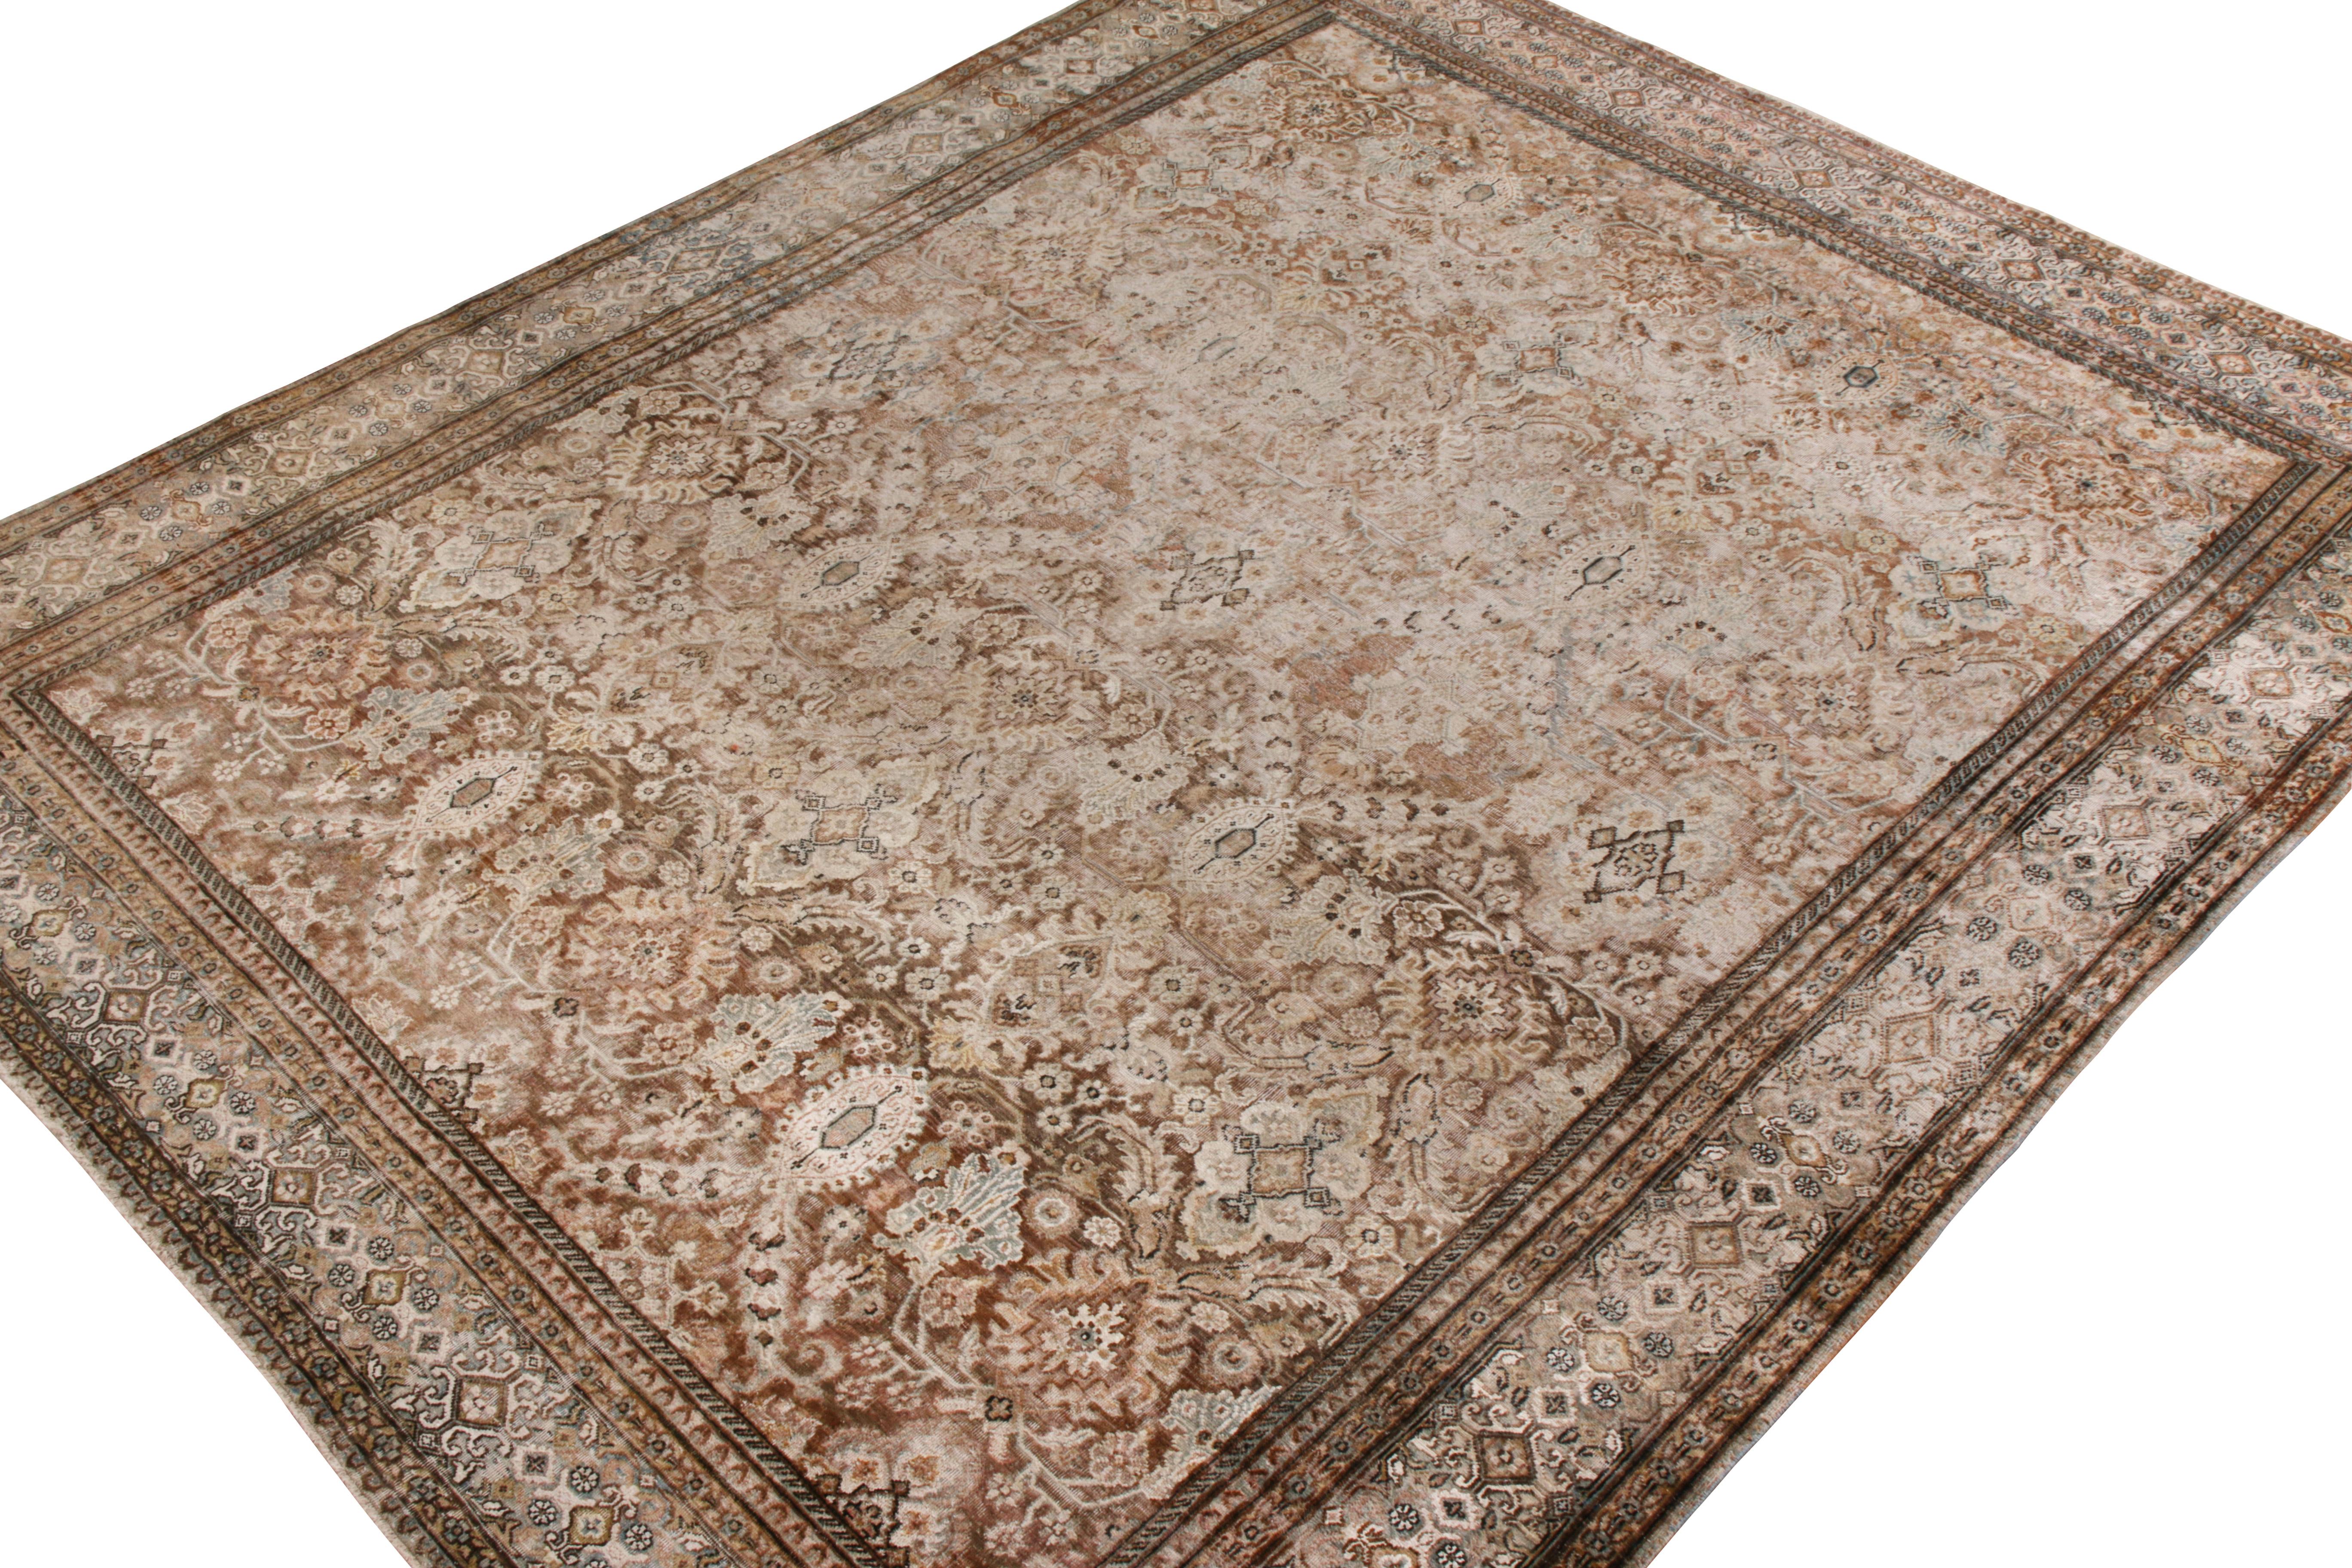 Indian Rug & Kilim’s Modern Classic Style Rug in Beige Brown Floral pattern For Sale